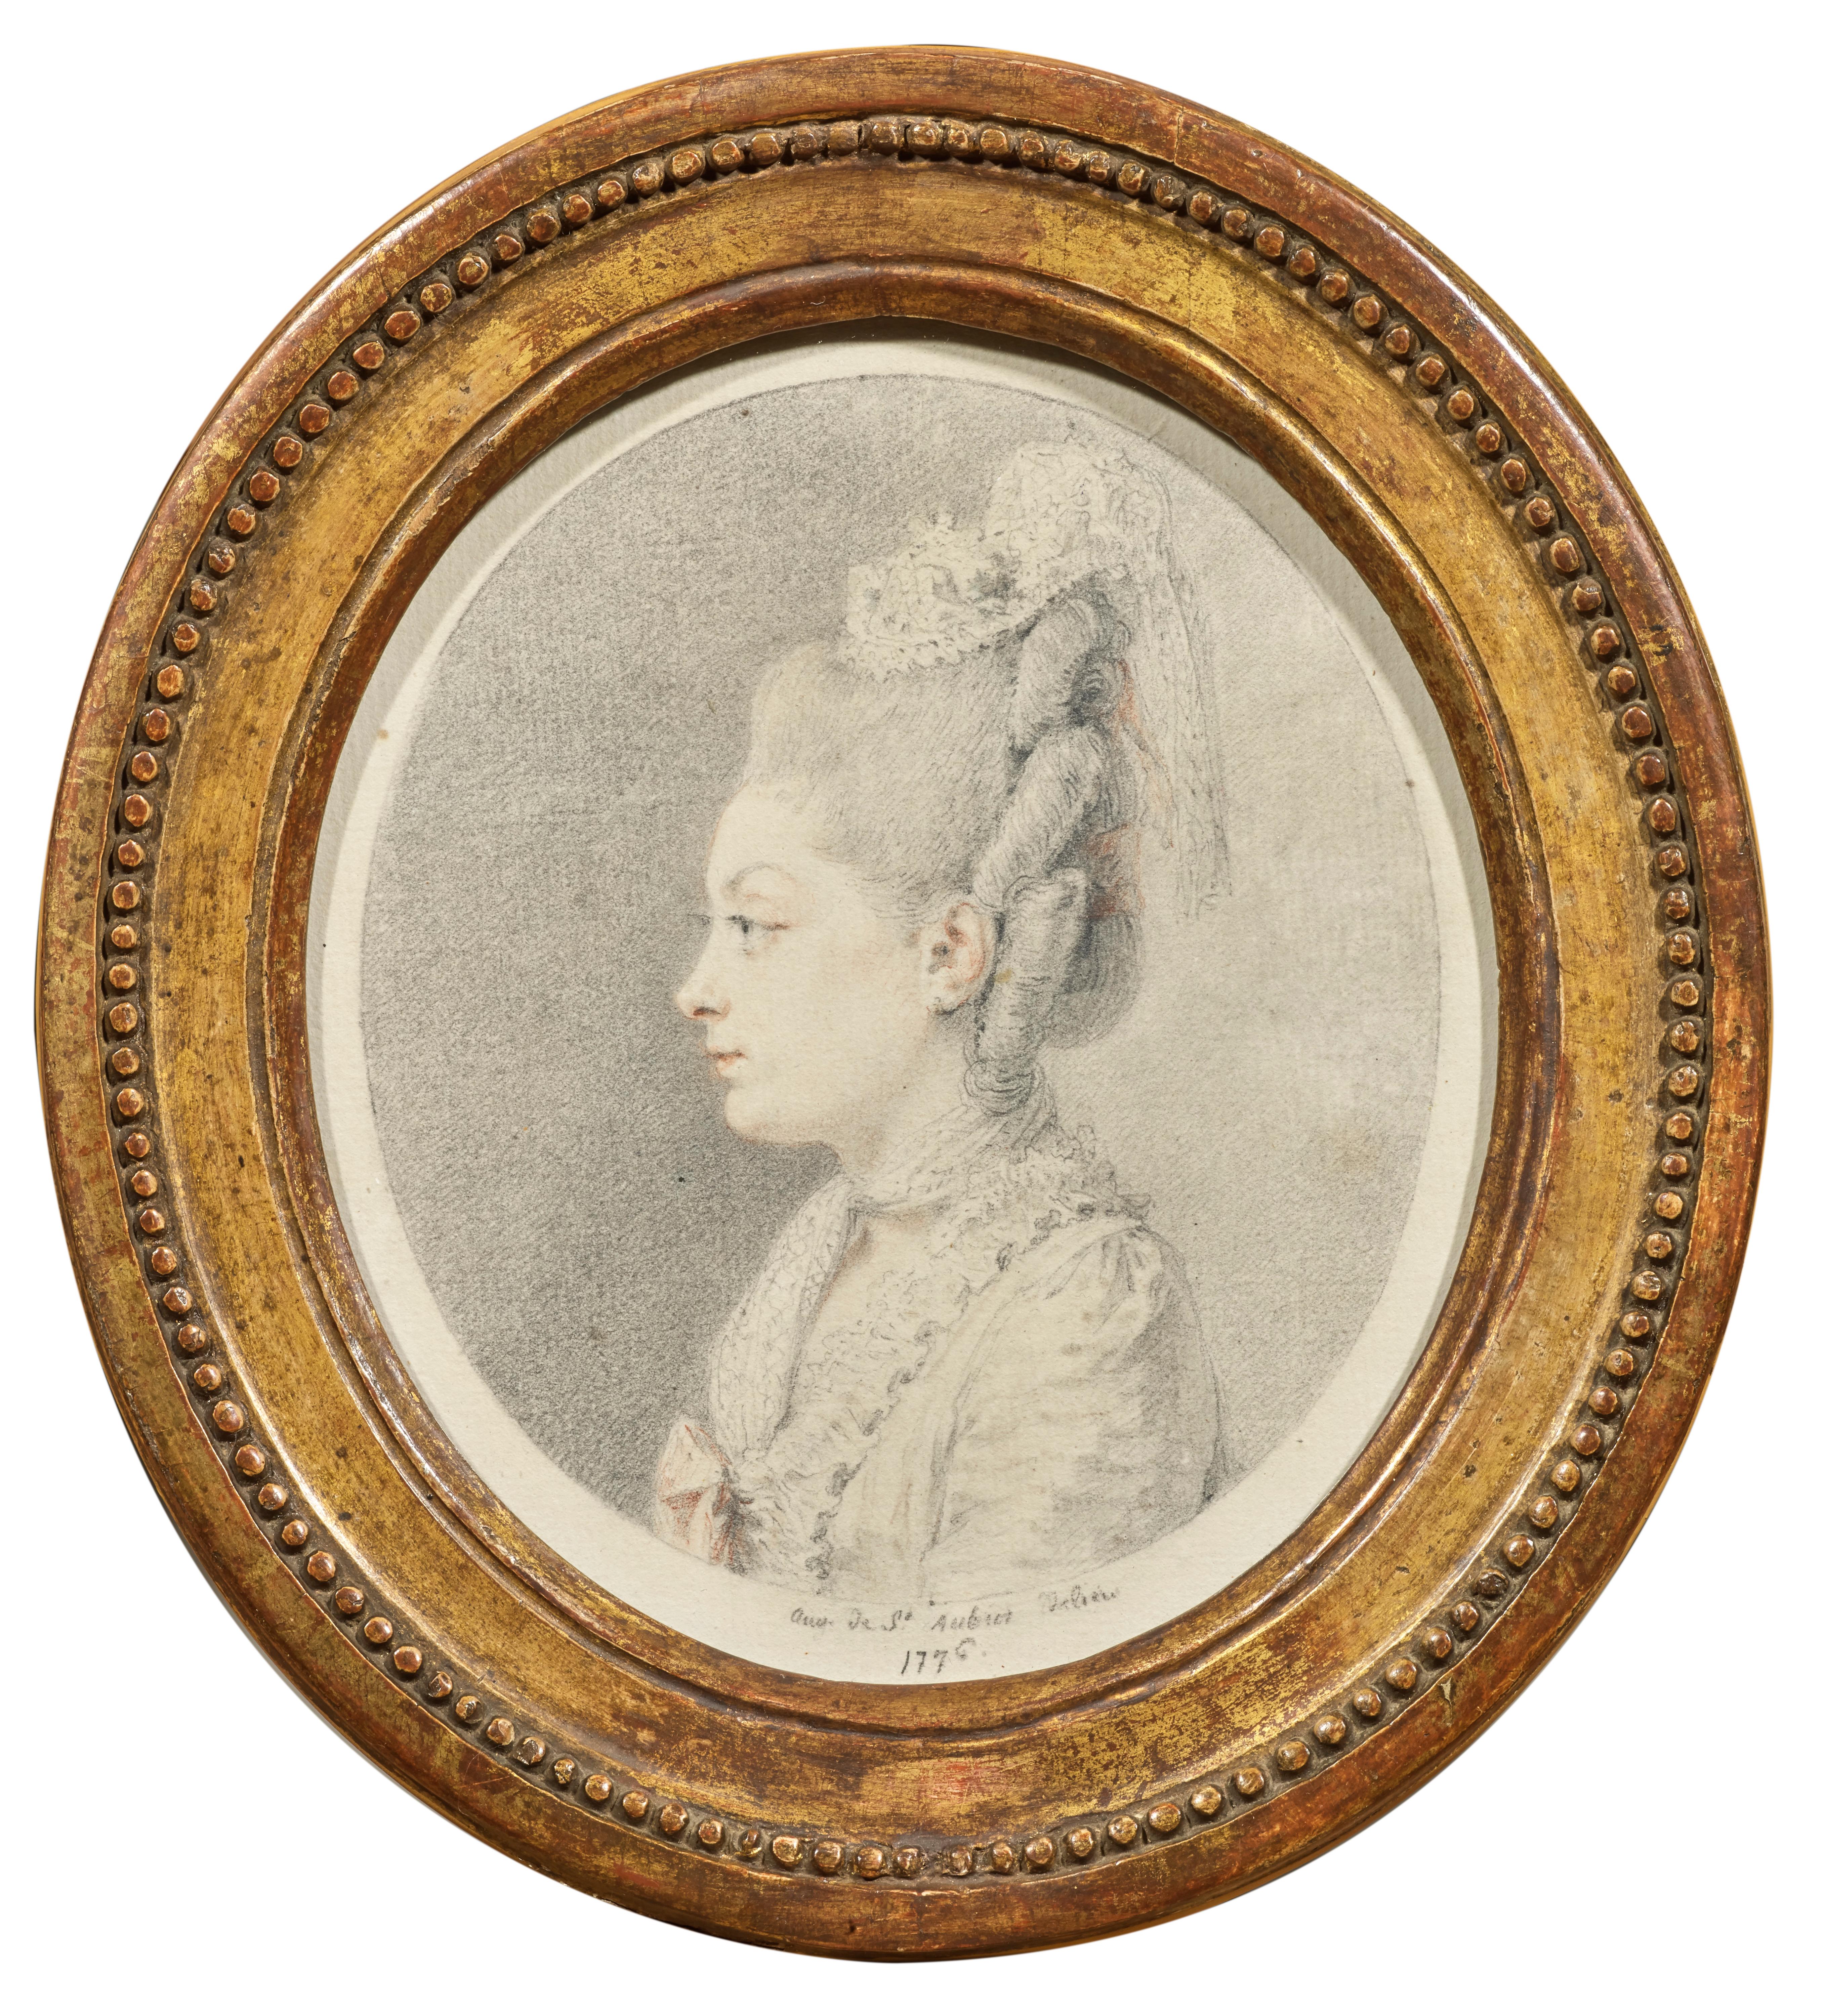 This drawing full of freshness presents us with the profile of an elegant lady, drawn by Augustin de Saint-Aubin on a beautiful summer day in 1776, during the early months of Louis XVI's reign.

1.	Augustin de Saint Aubin

Augustin de Saint-Aubin